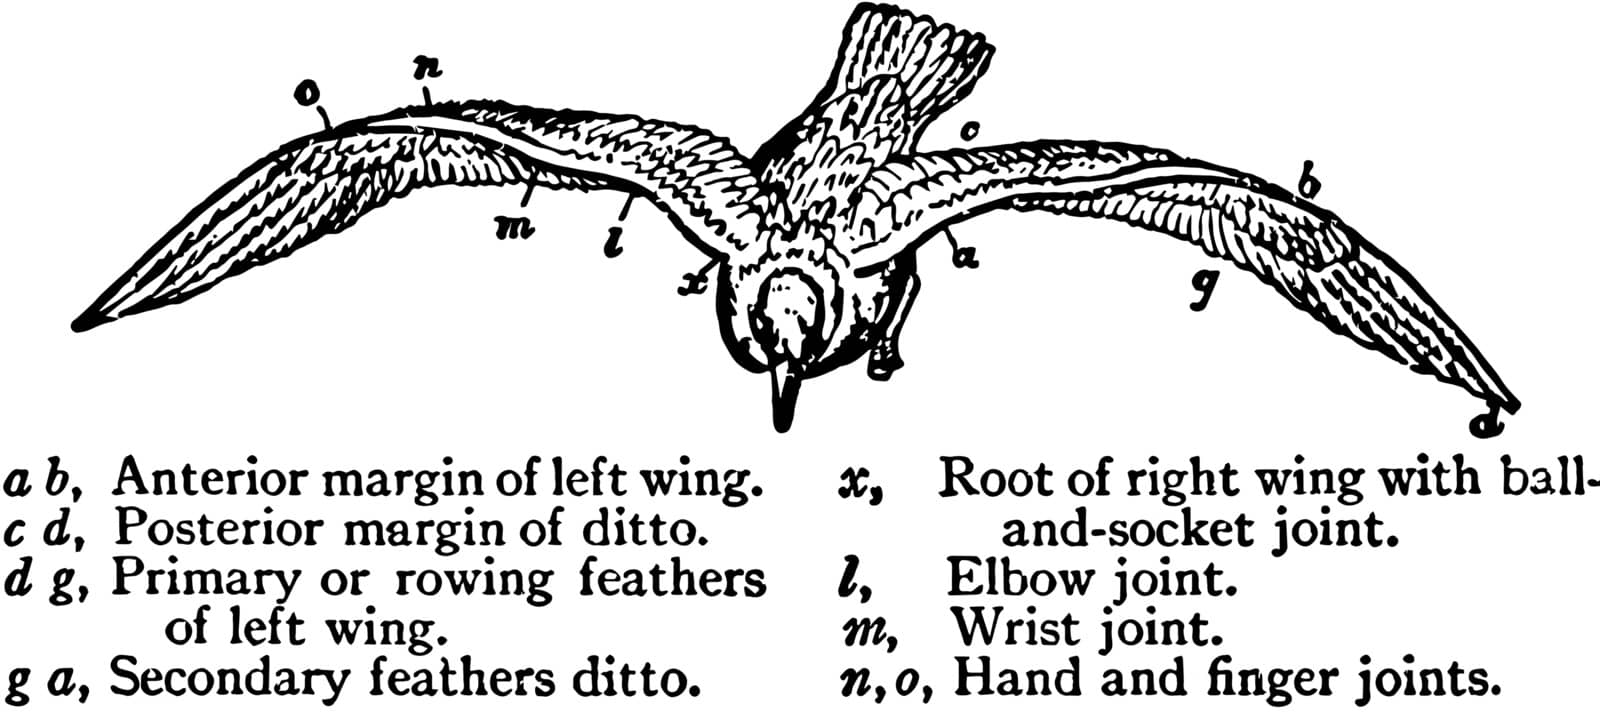 Elastic Spiral Wings of the Gull where an anterior margin of the left wing, vintage line drawing or engraving illustration.